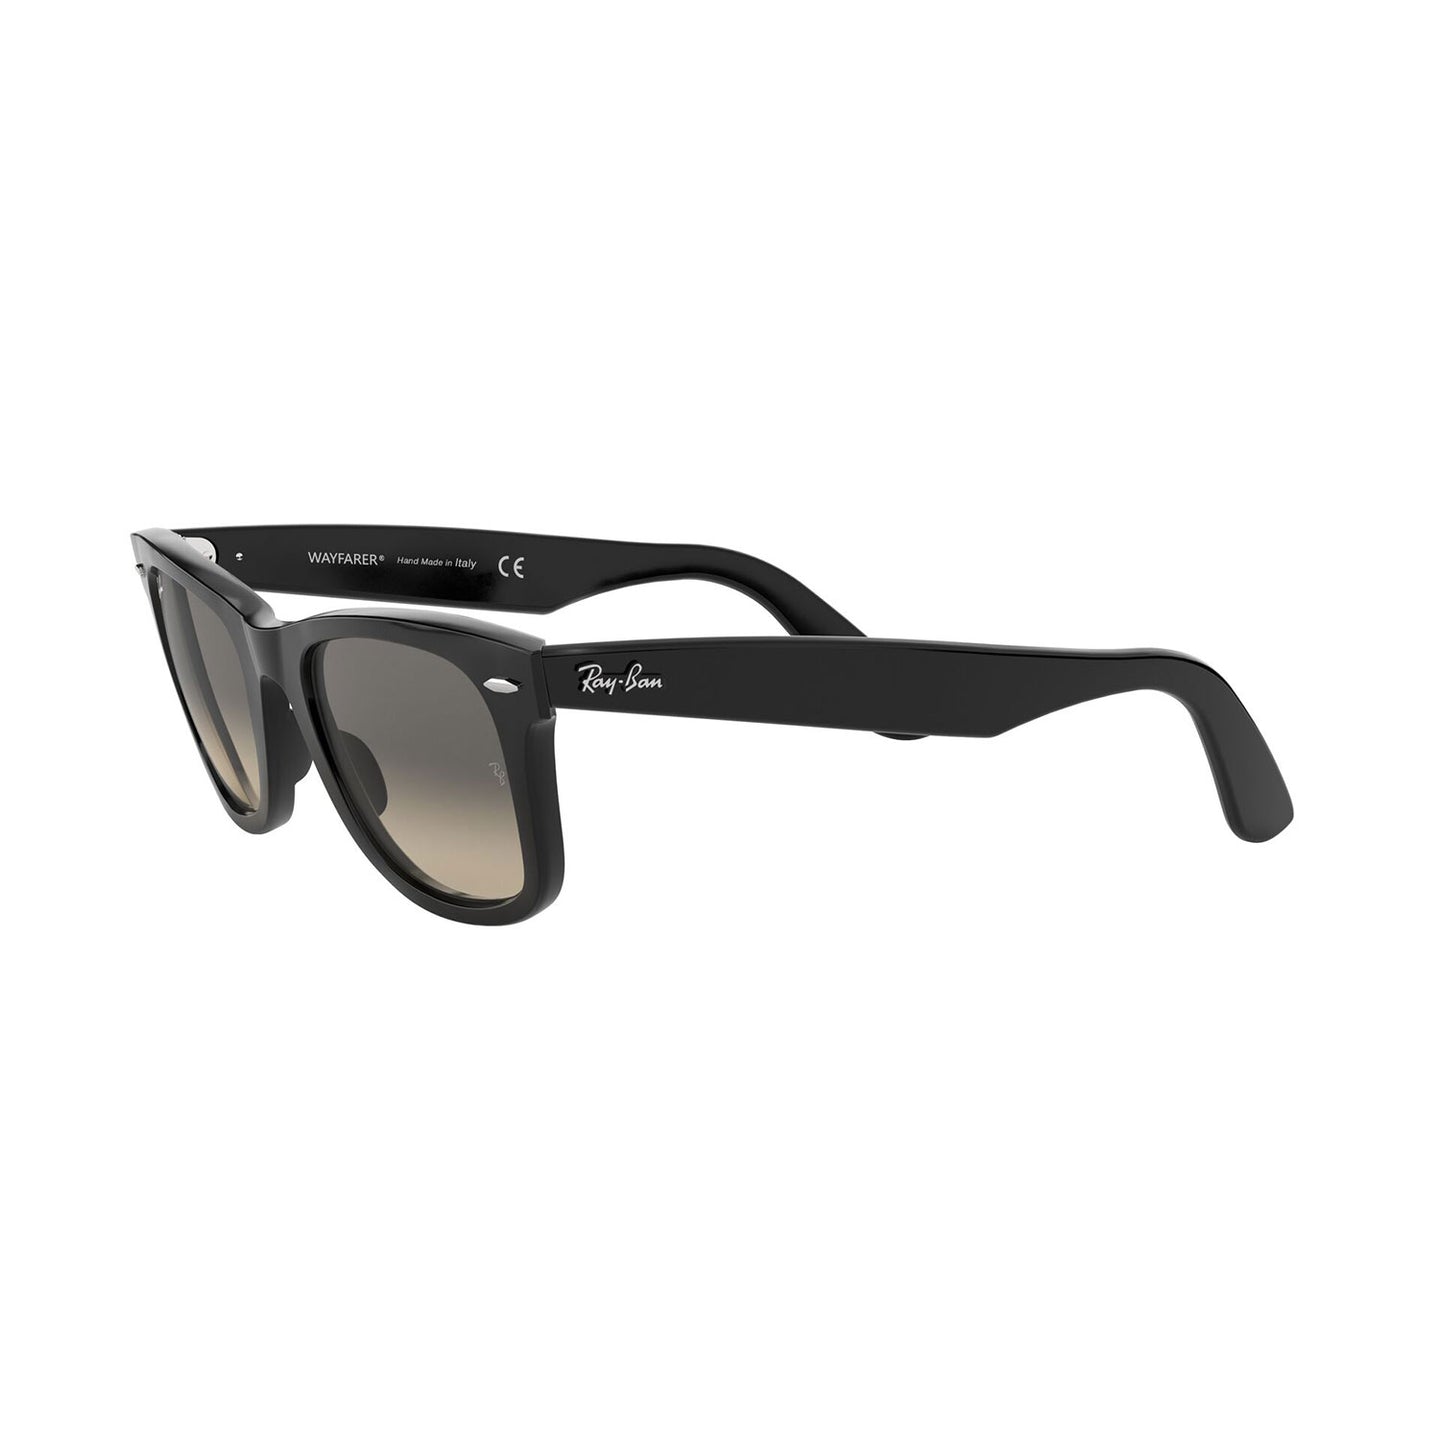 RAYBAN model RB_2140 color 901/32